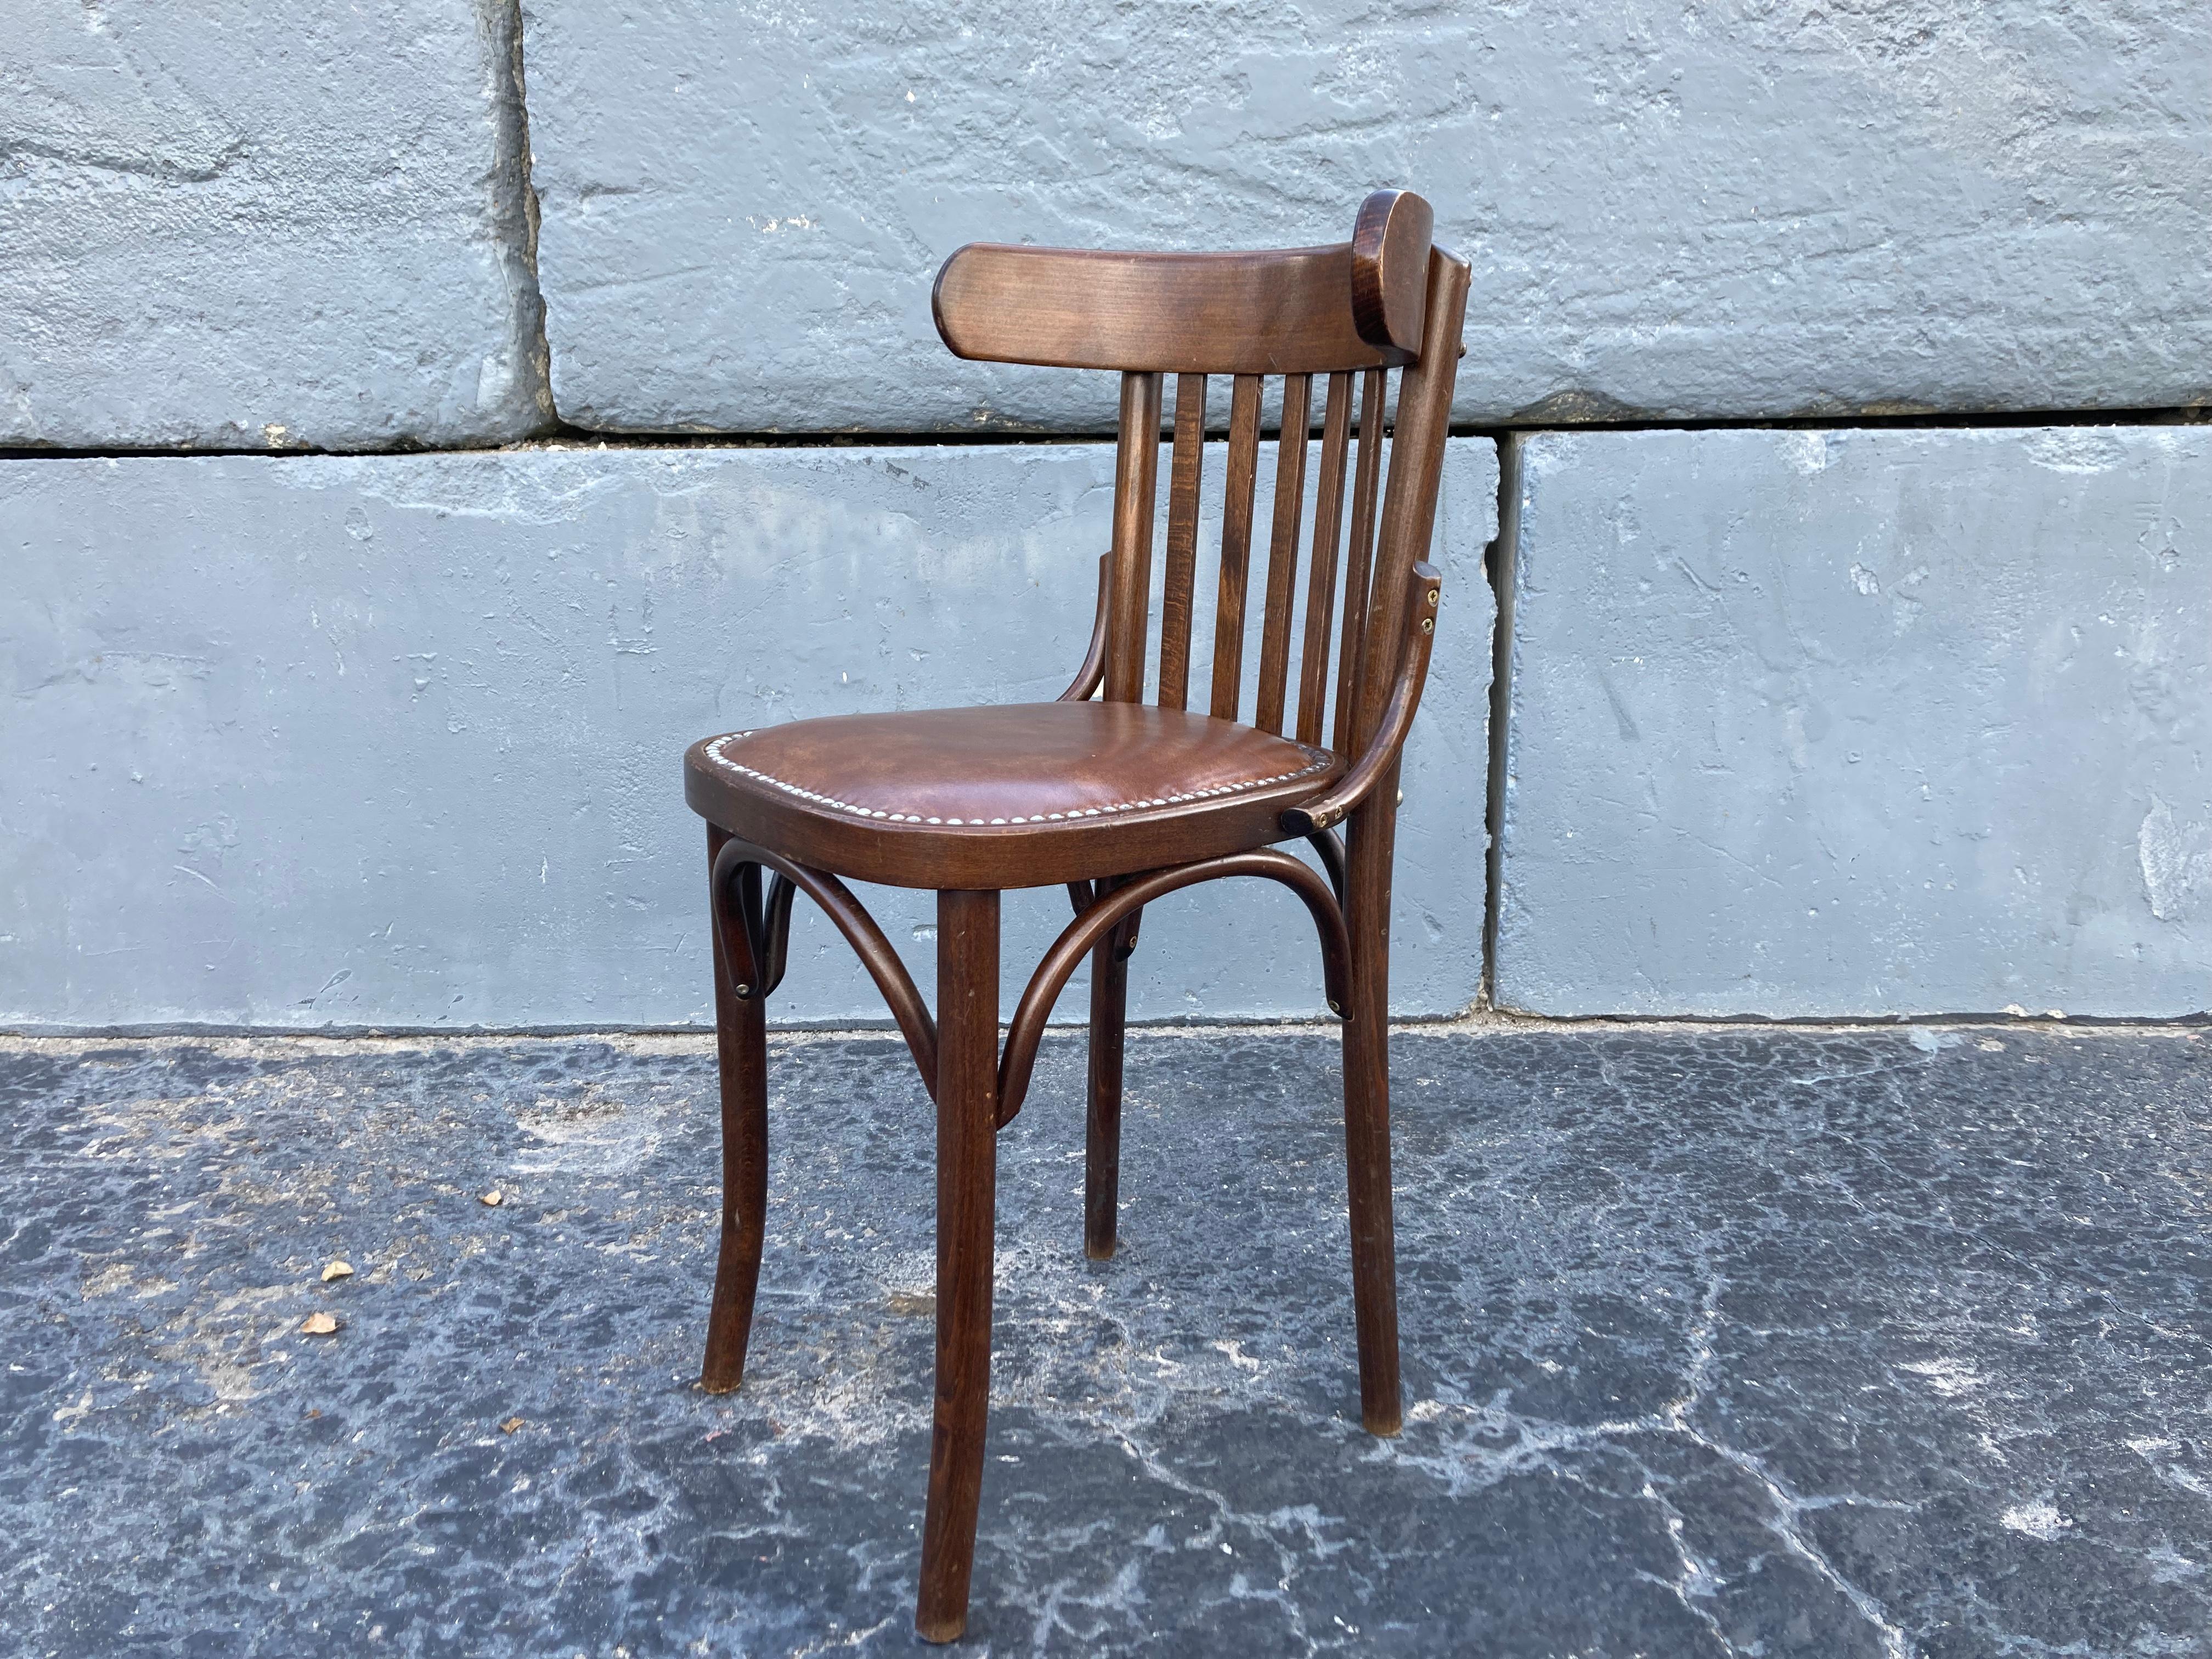 Great dining chairs by Berc Antoine, made in France. Seats are vinyl. More chairs available.
Measures: width of back is 17.50”.